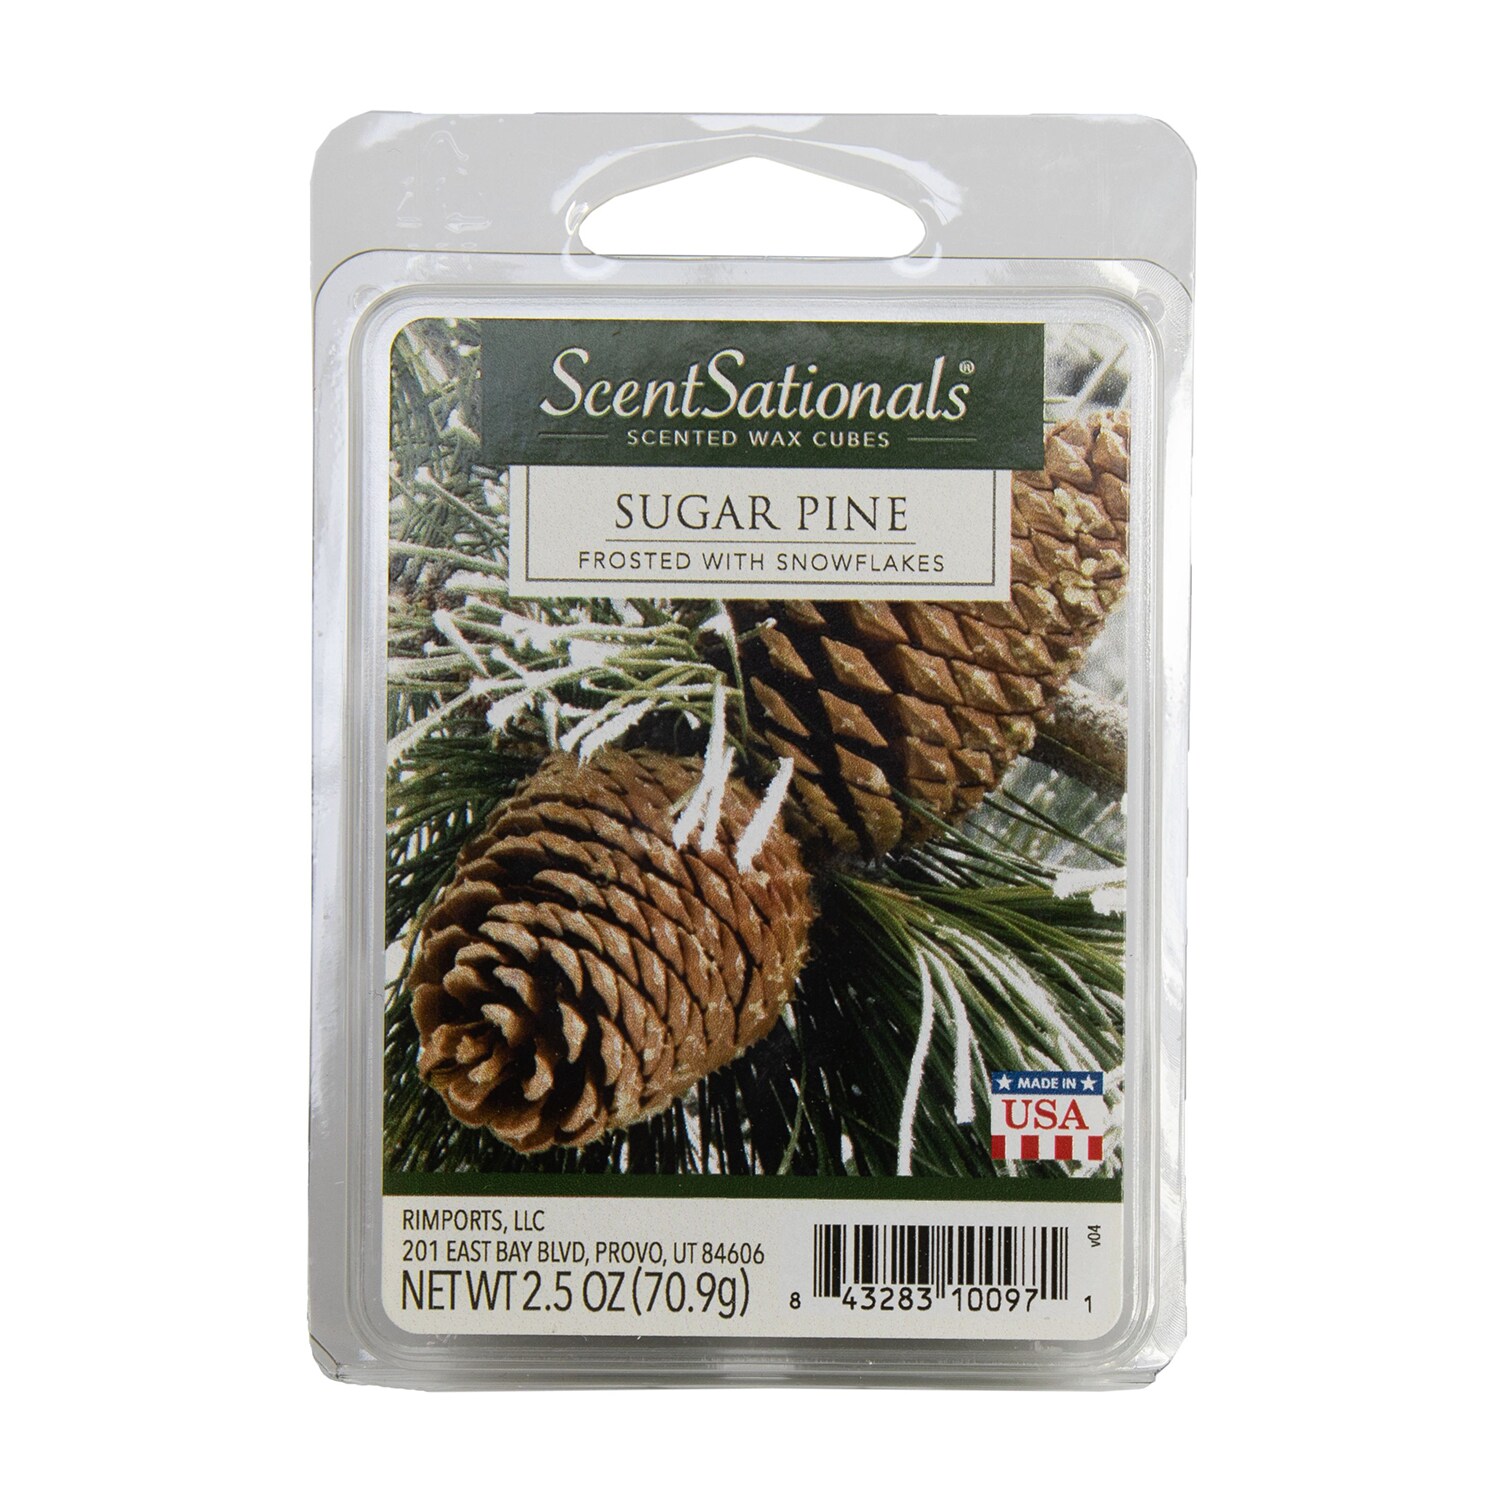 ScentSationals Sugar Pine 2.5 Oz Scented Fragrant Wax Melts- 4 Pack at